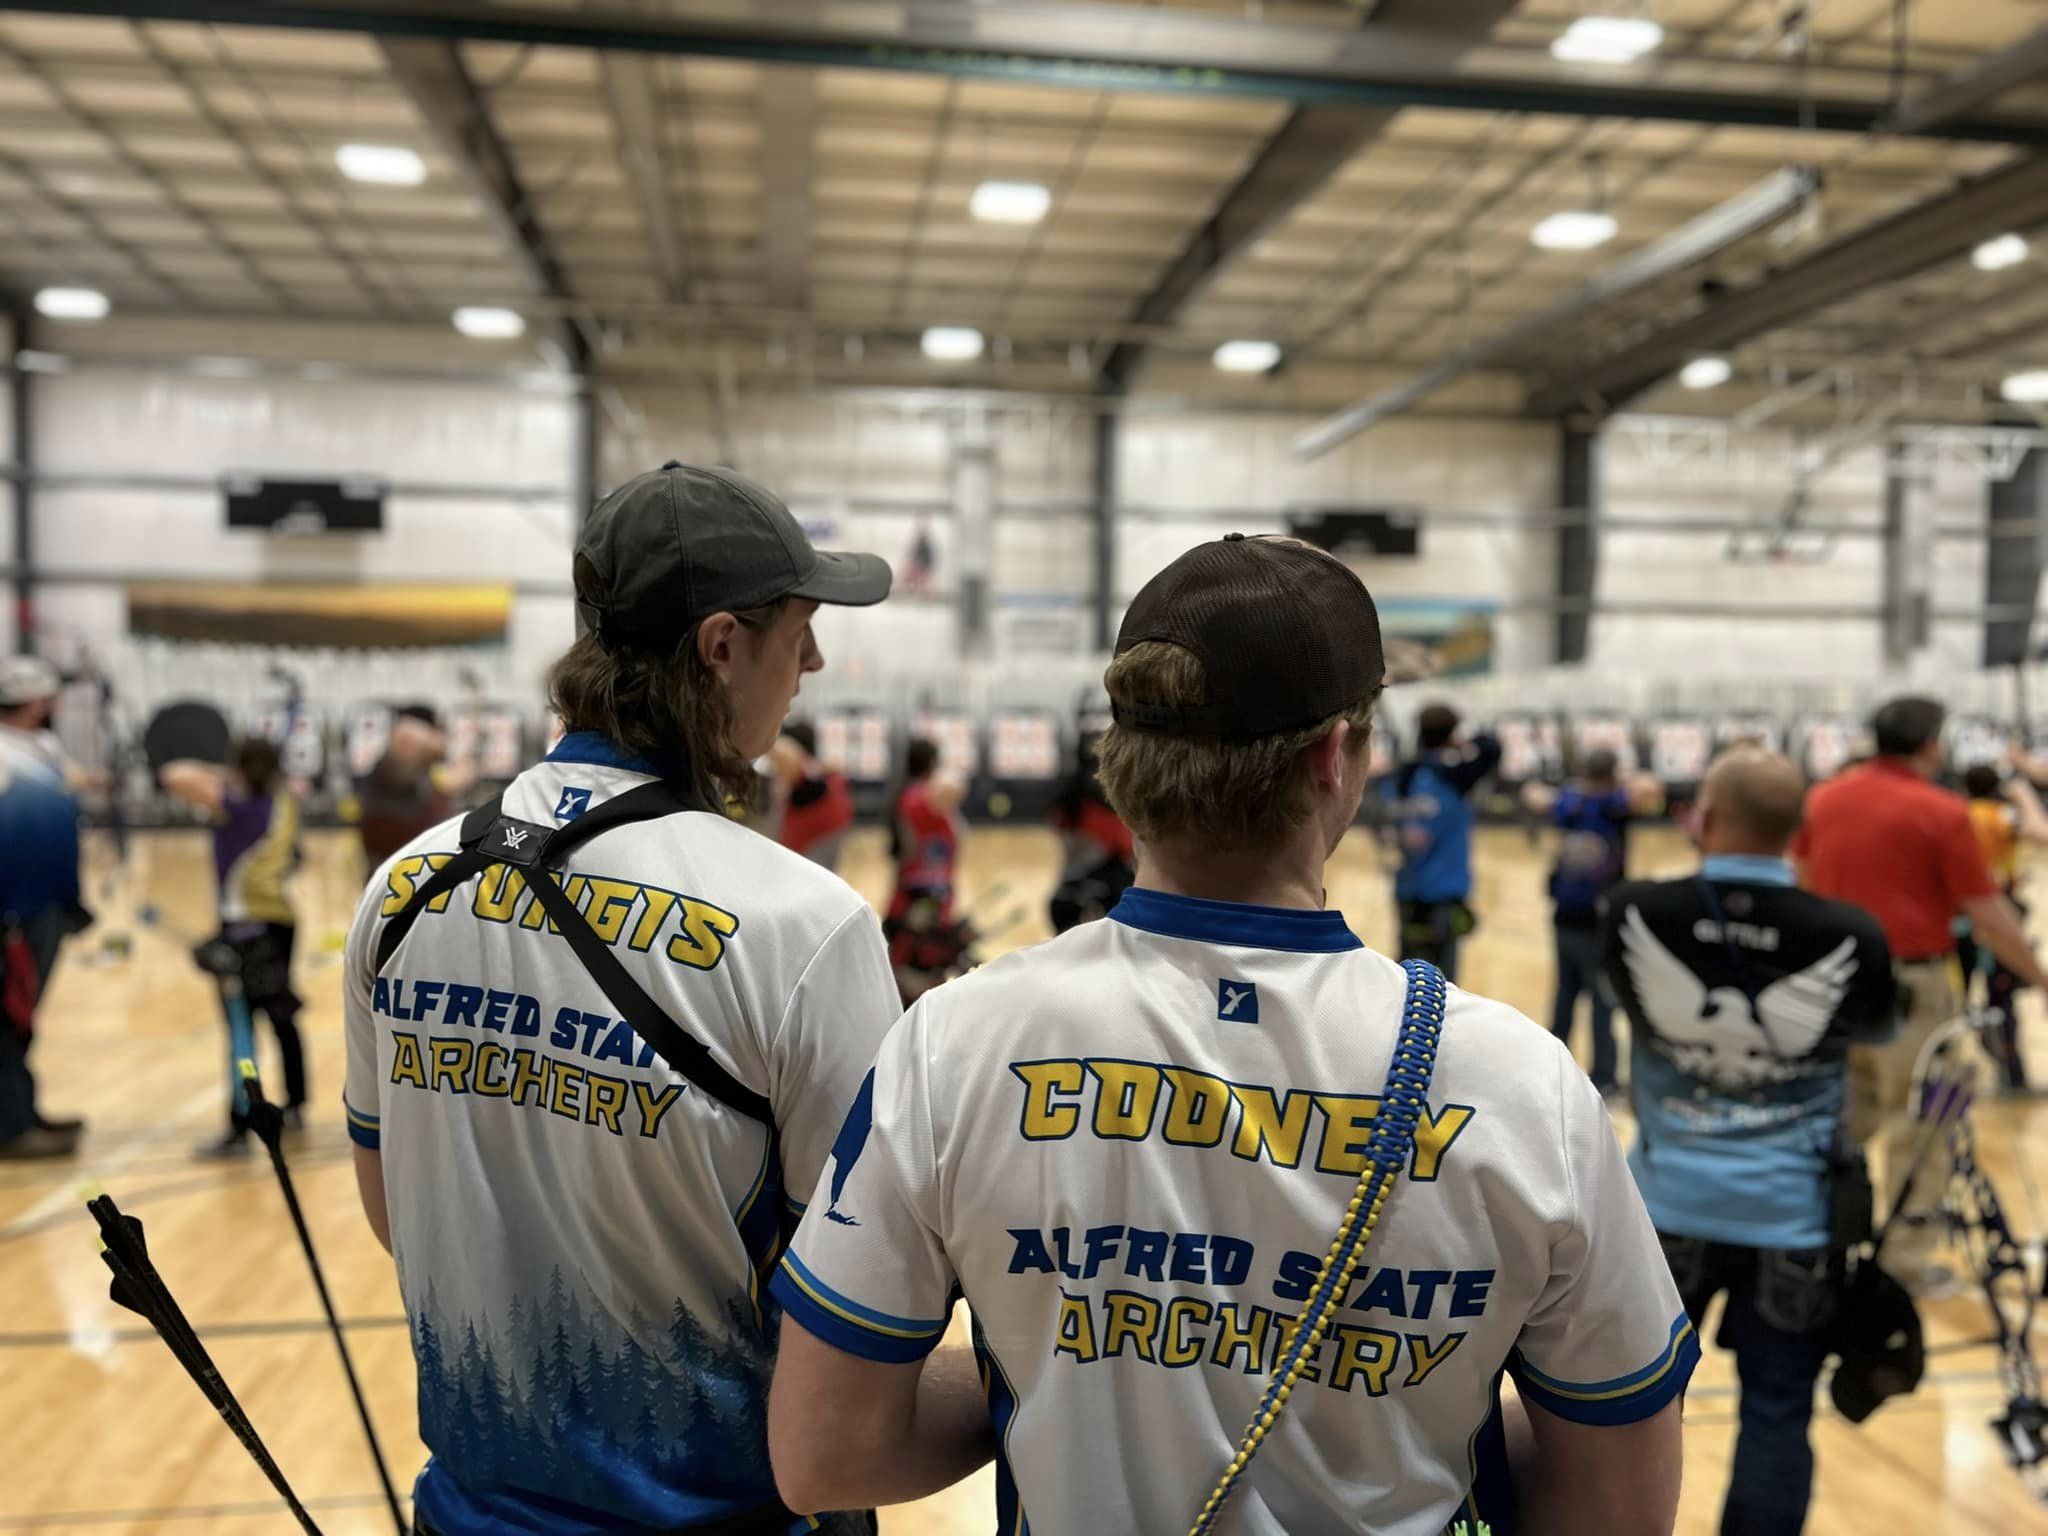 Archers look on at the competition.